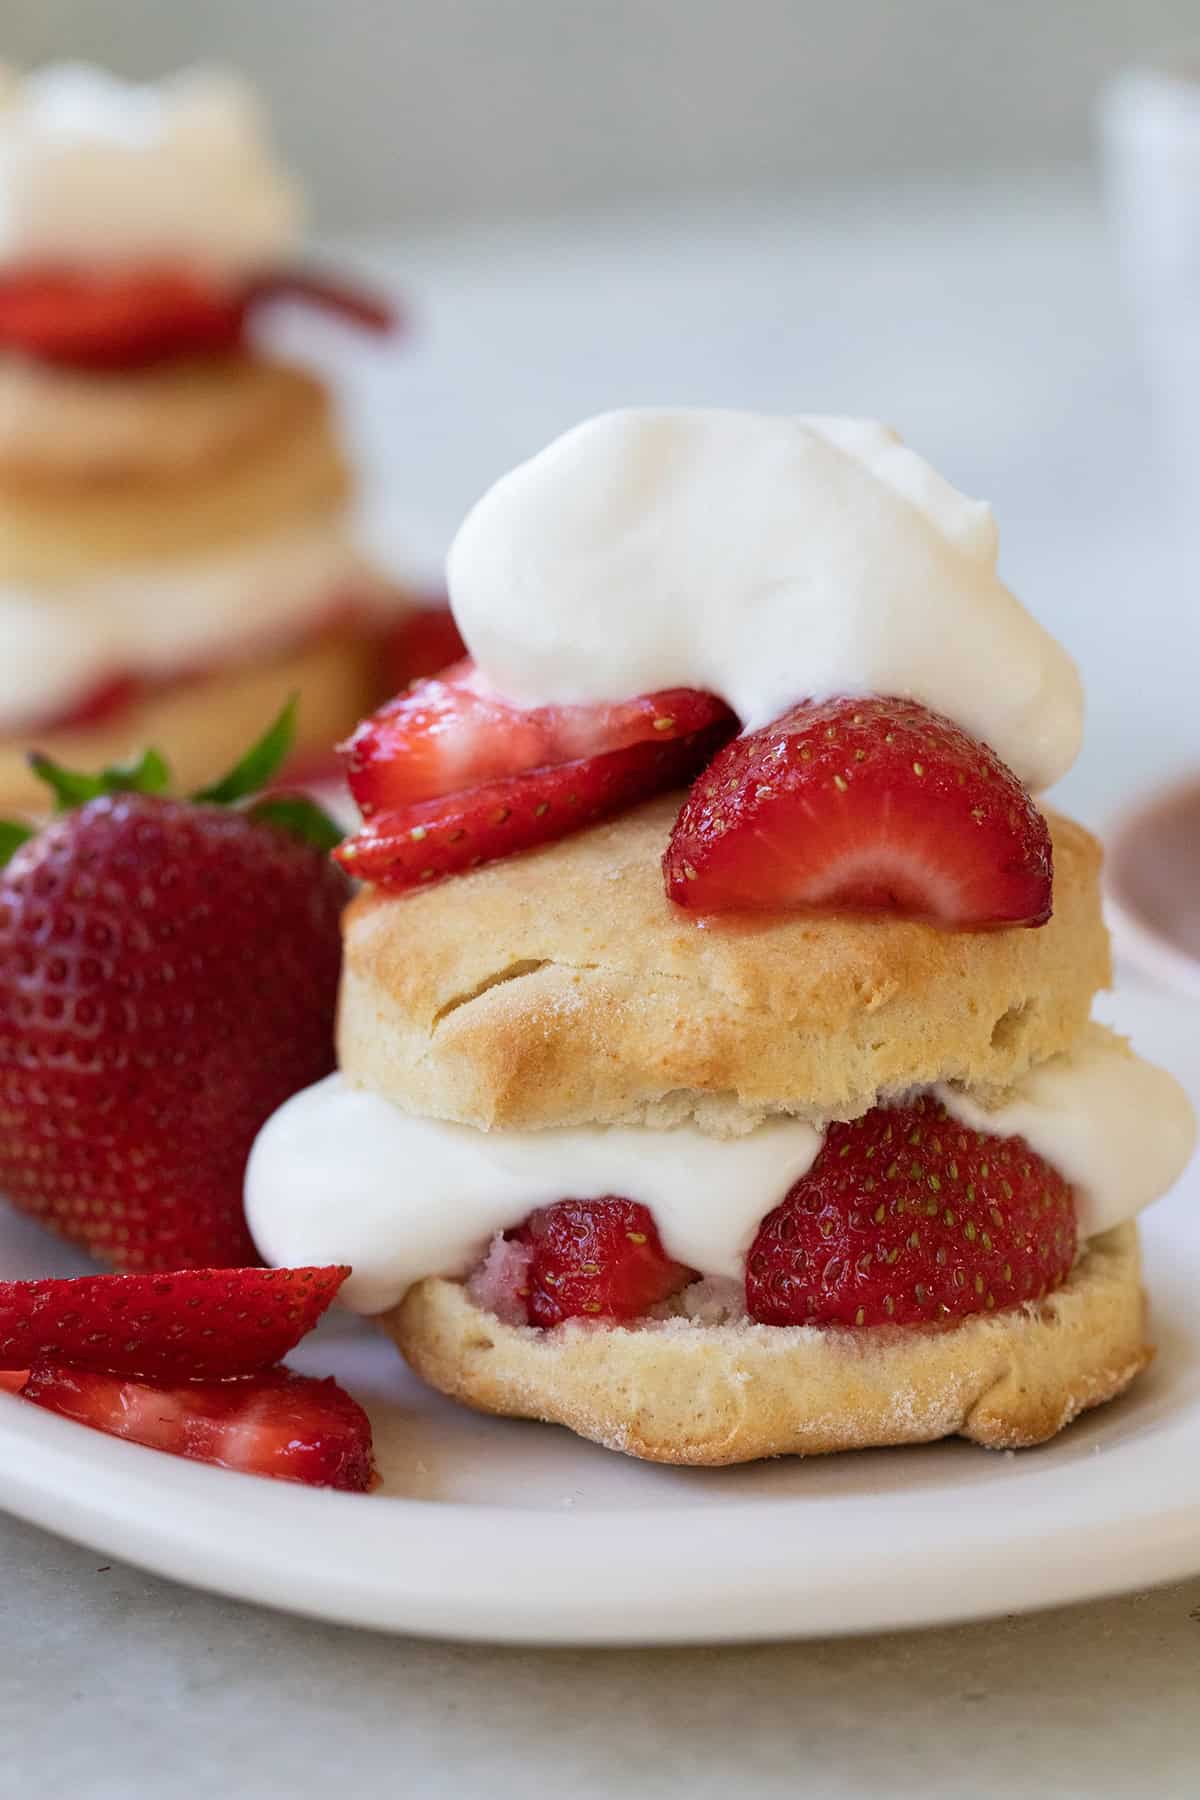 strawberry shortcake recipe made with homemade biscuits.